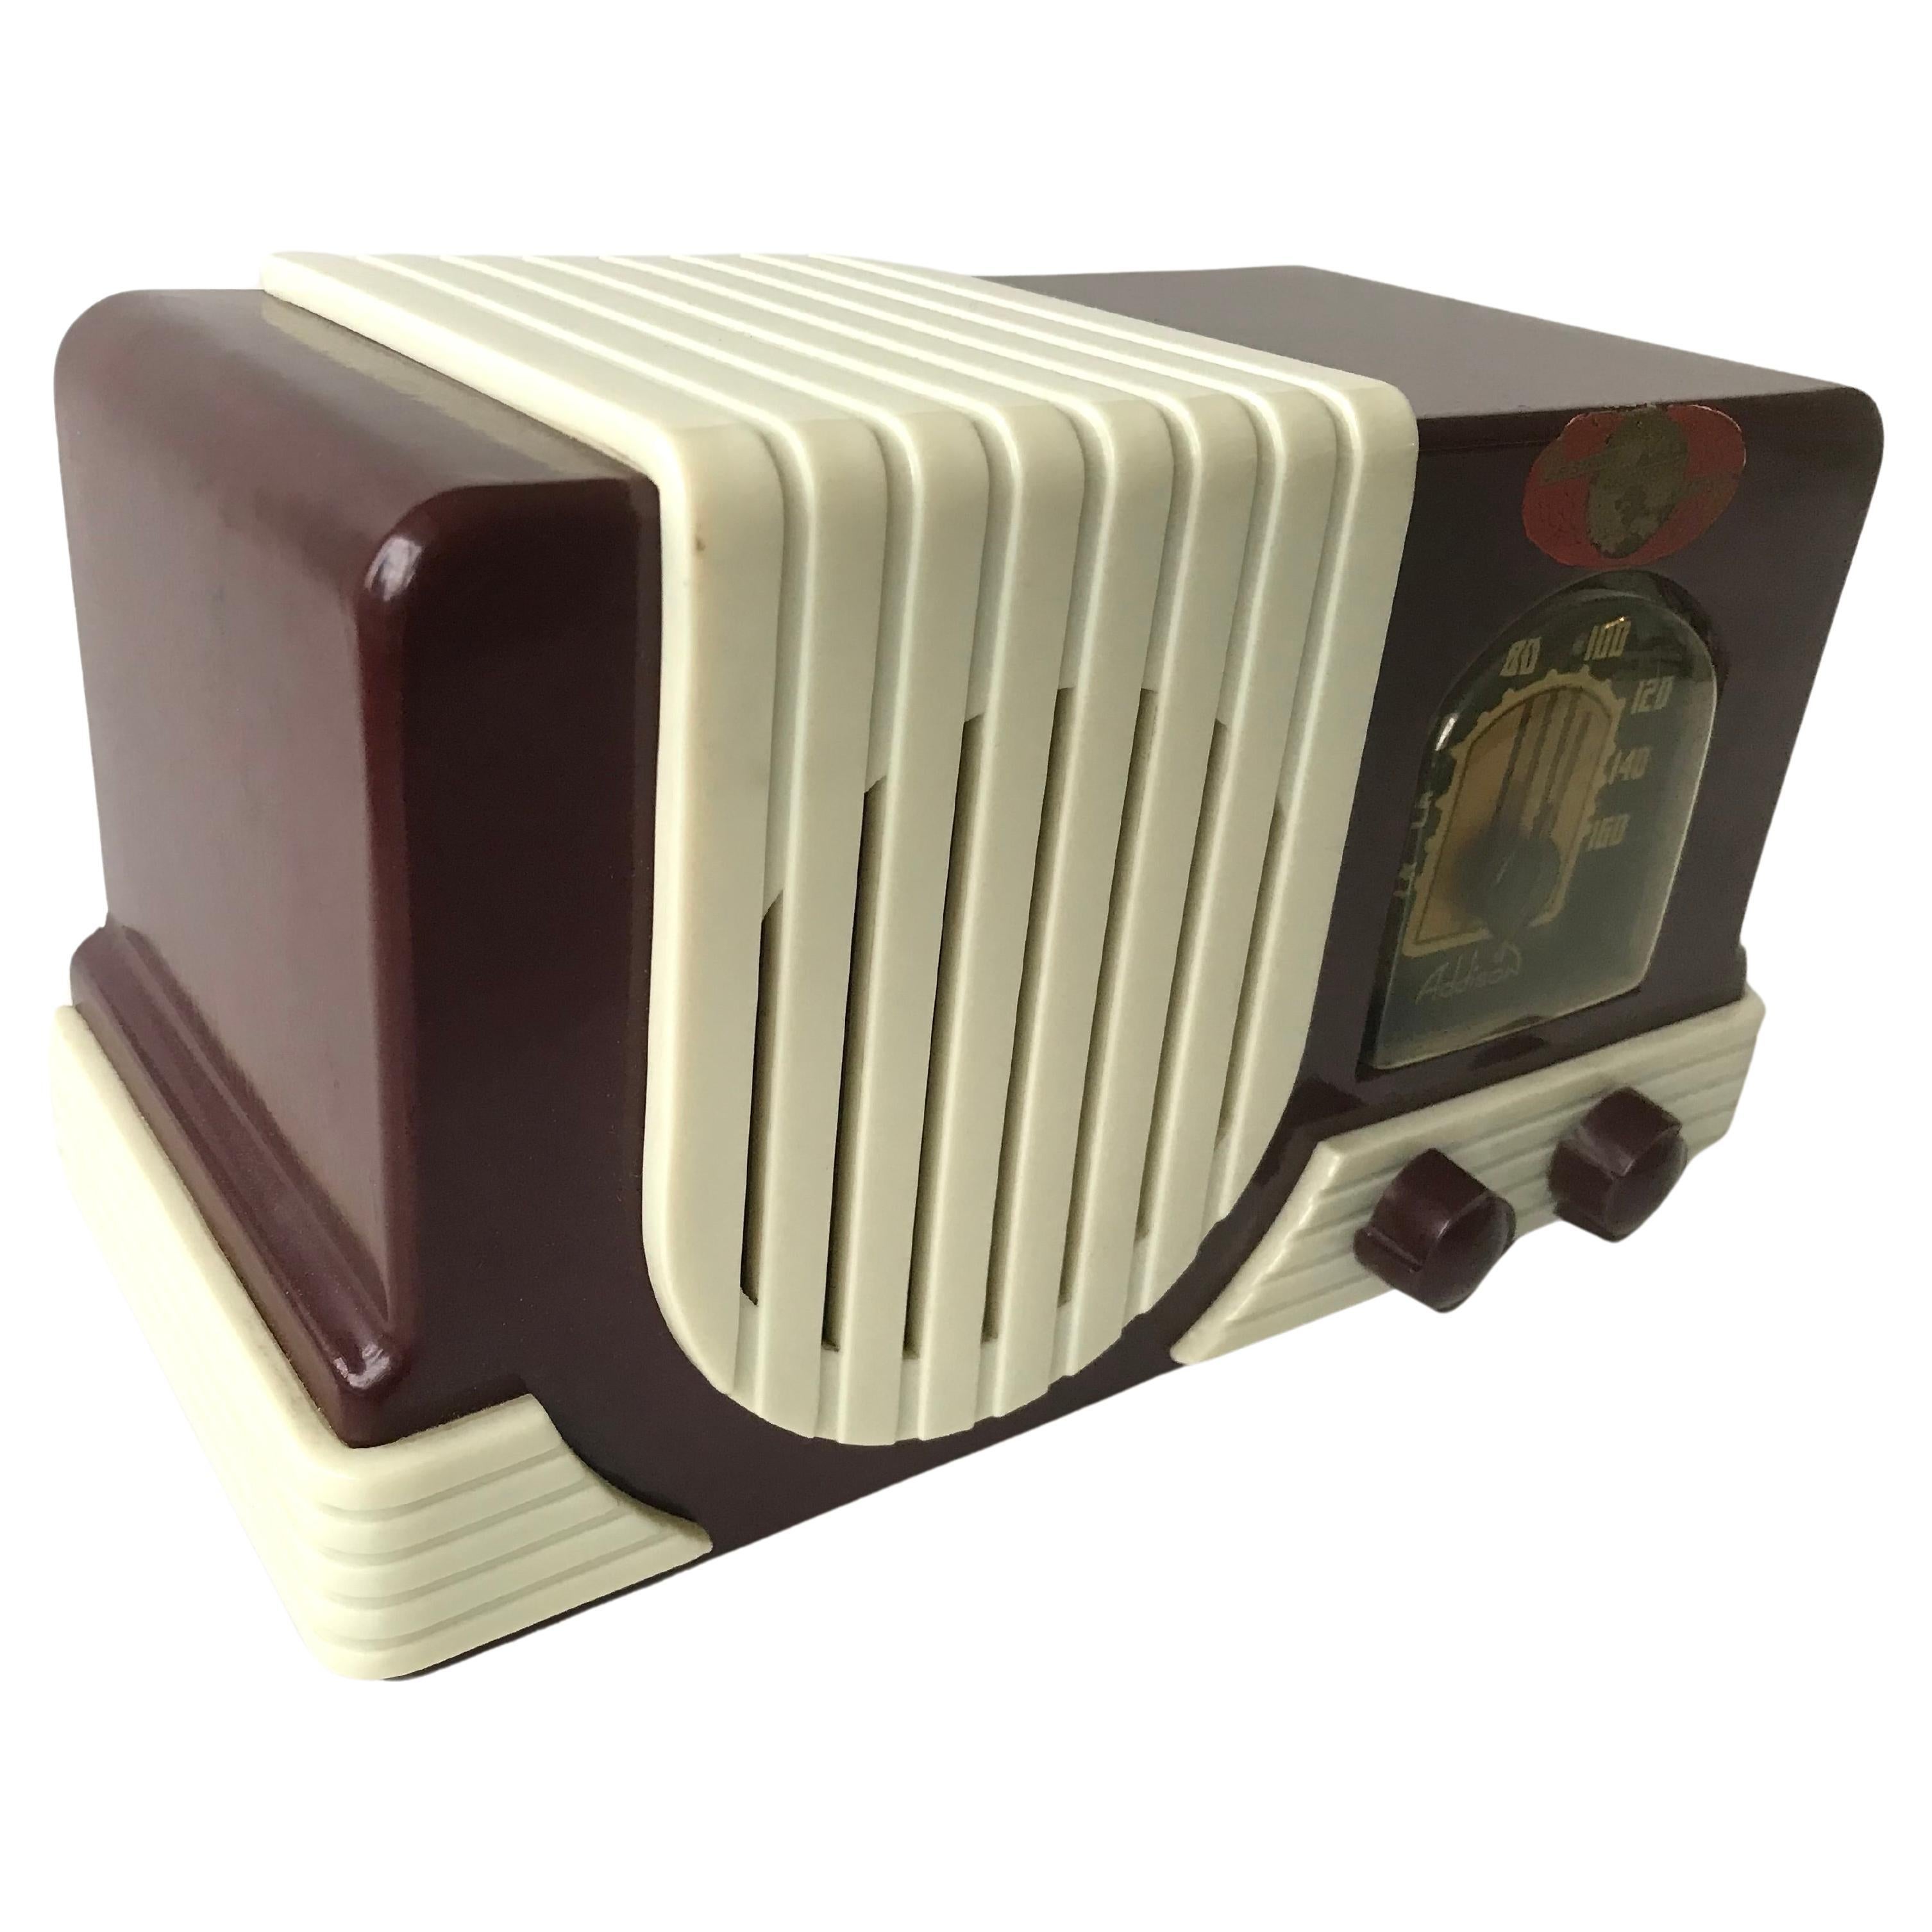 Addison Model 2 “Waterfall” Maroon and White Catalin Tube Radio, 1940 For Sale